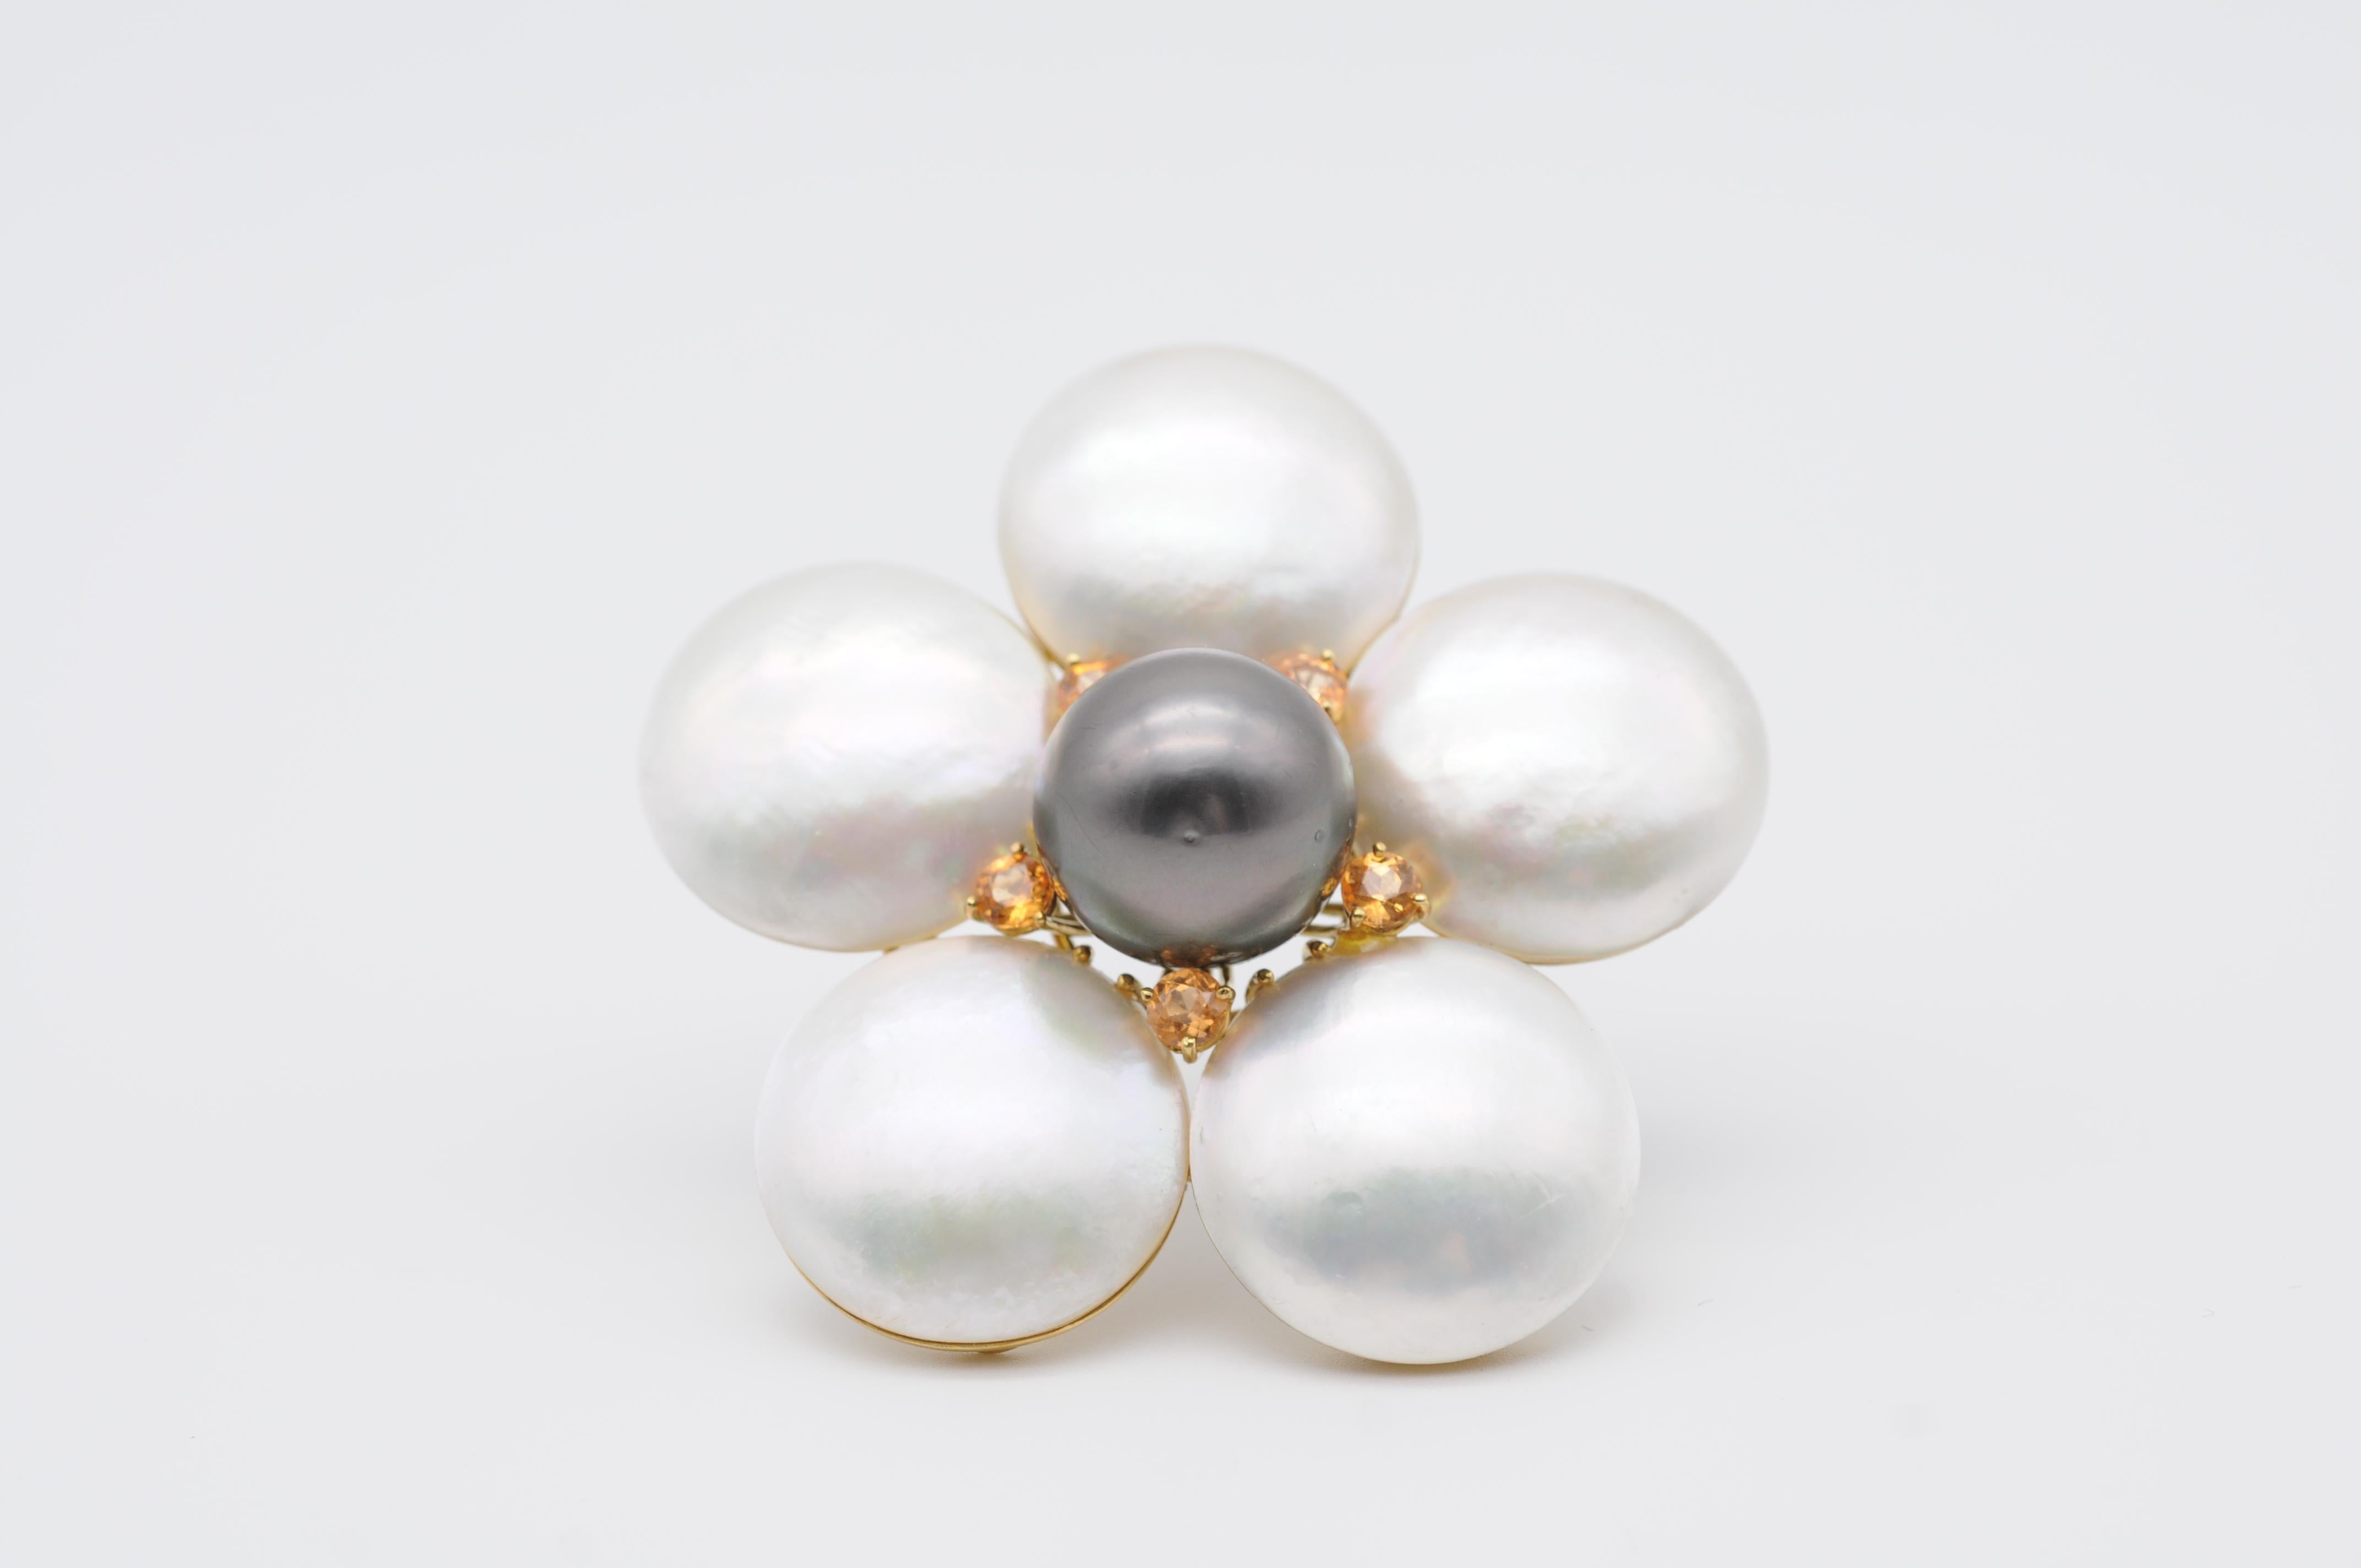 This unique pearl brooch is a true masterpiece of craftsmanship and design. It features a large flower-shaped setting made of 18k solid yellow gold, which showcases a stunning black Tahitian pearl in the center. The lustrous pearl shimmers with